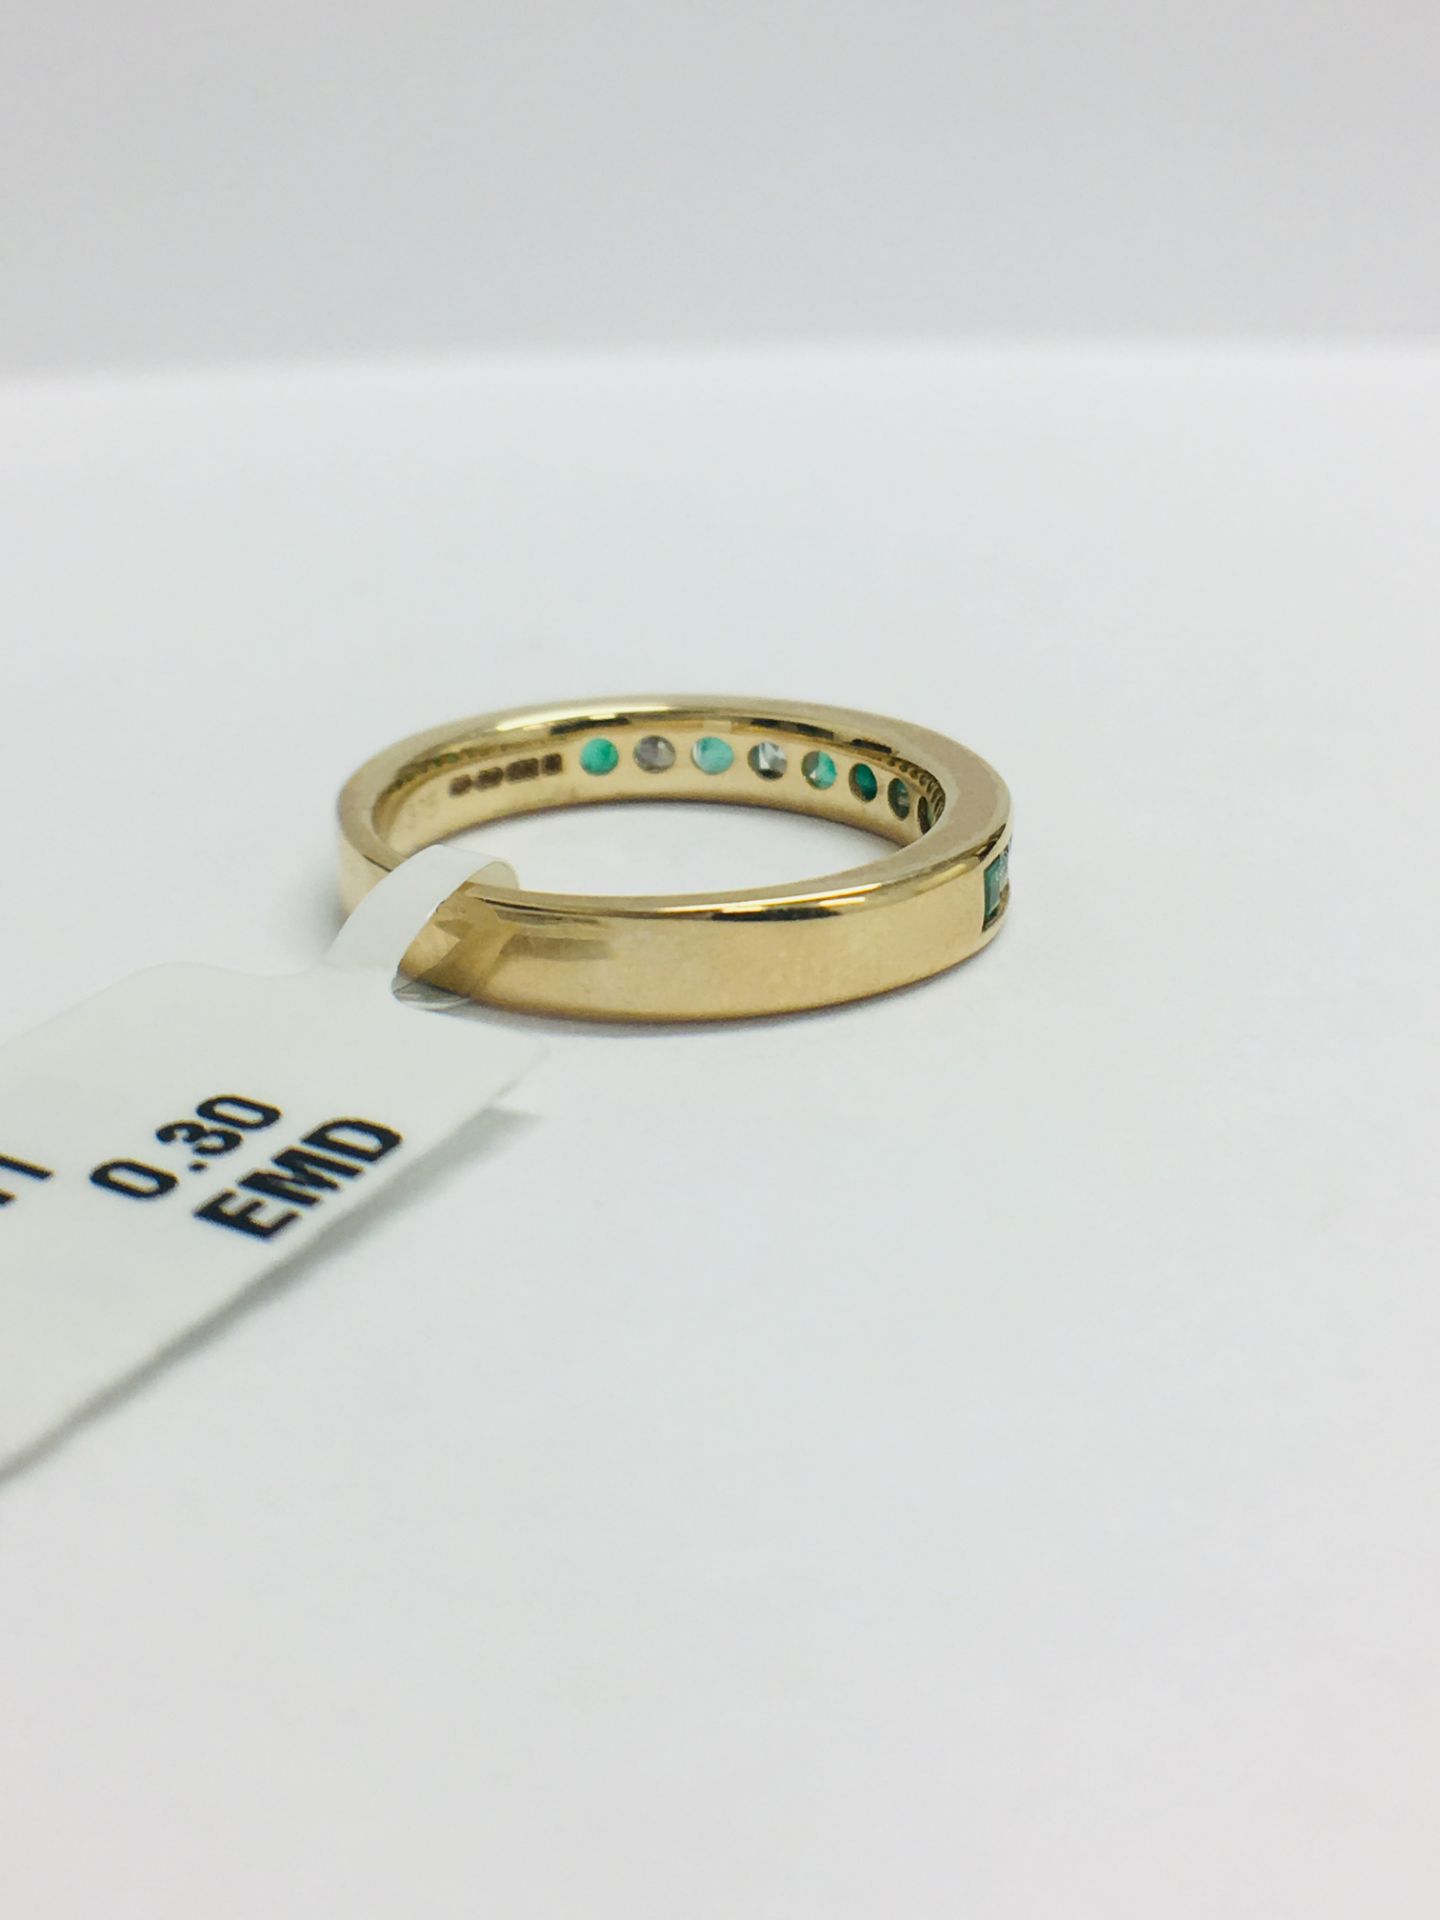 9ct Yellow Gold Emerald Diamond Channel Set Eternity Ring - Image 6 of 13